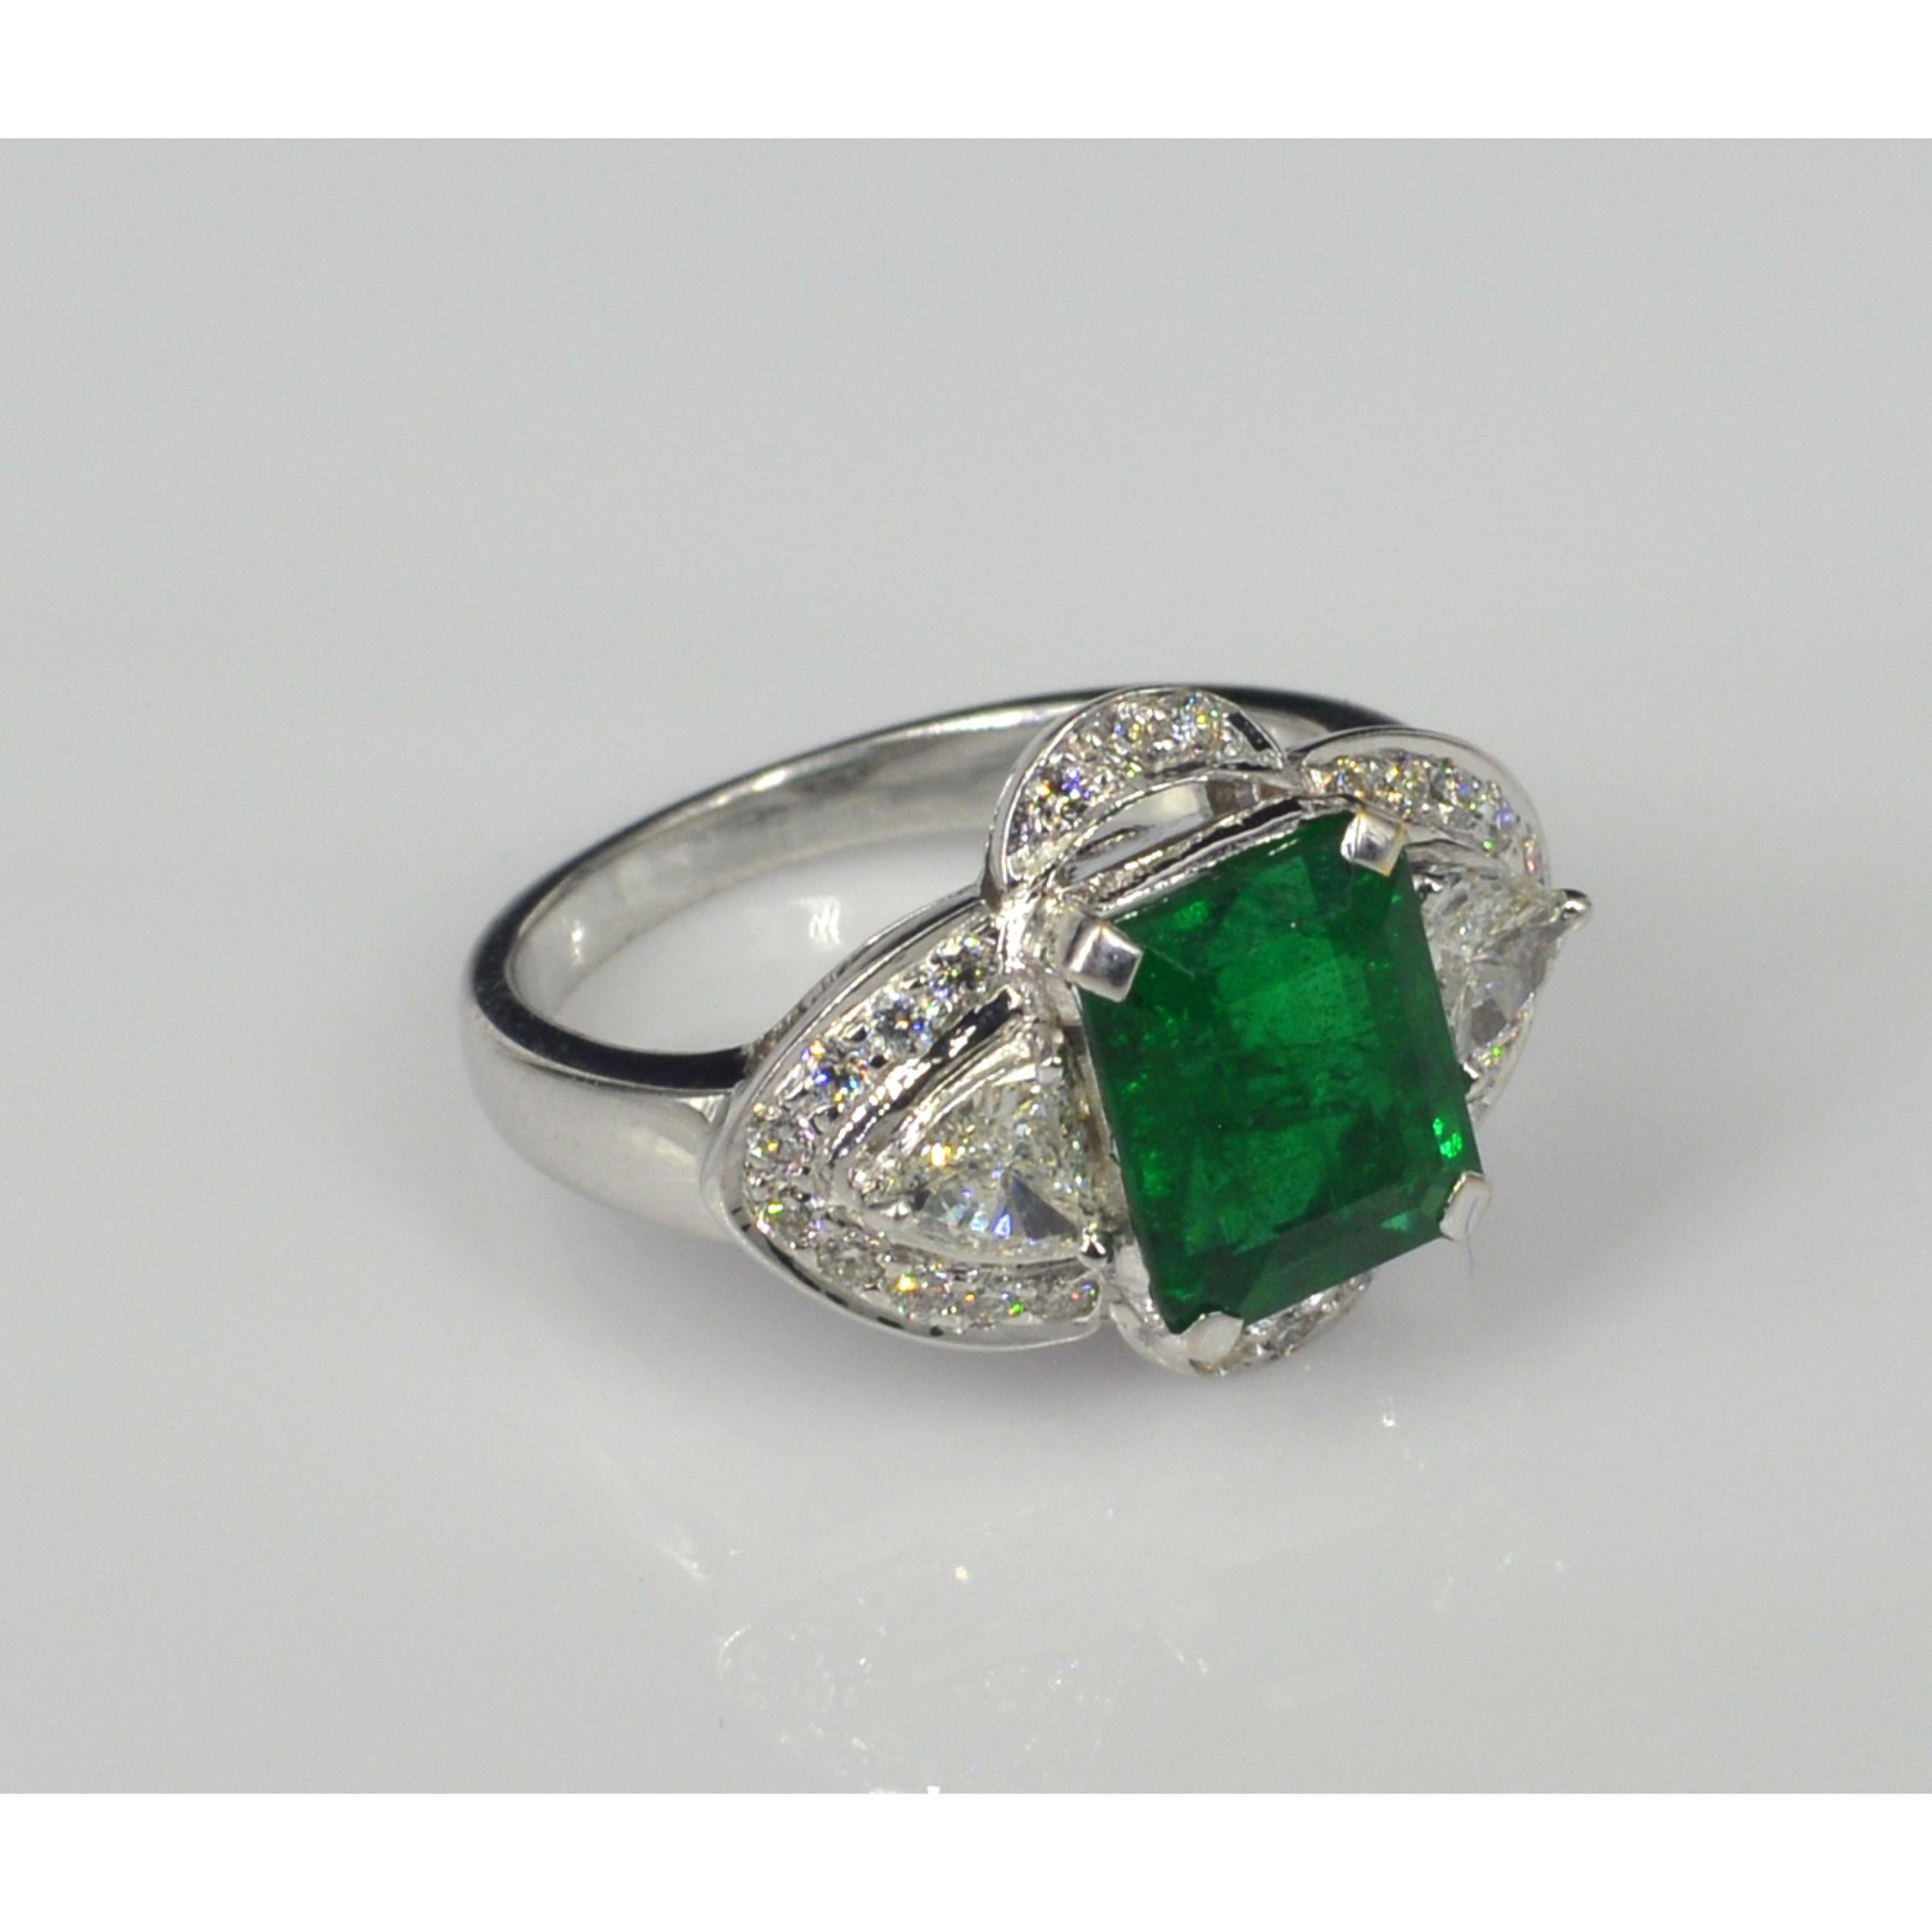 For Sale:  Antique 3 Carat Emerald Engagement Ring, Emerald Statement Ring 3